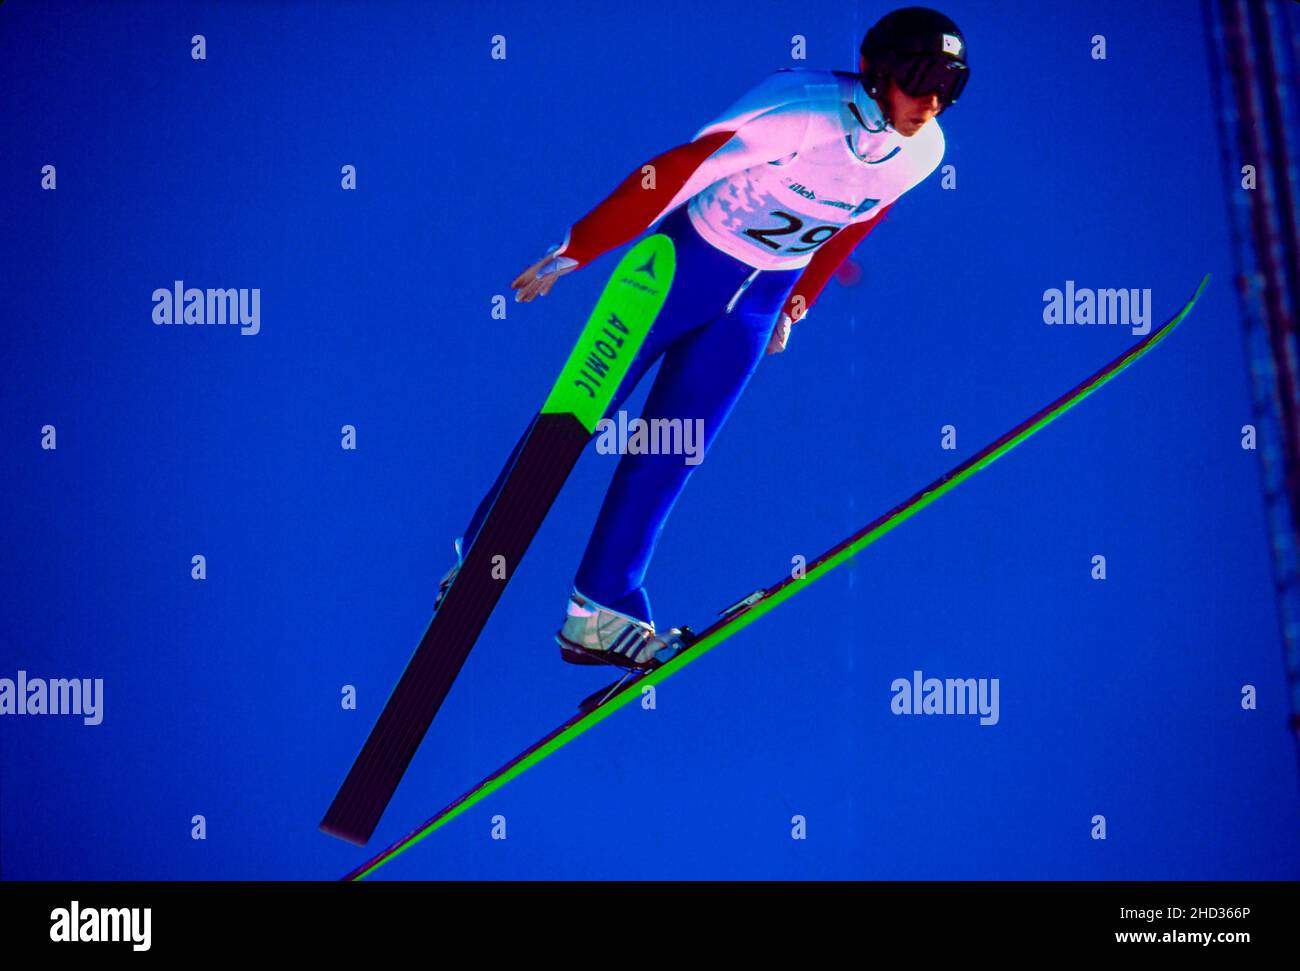 Nicolas Dessum (FRA) competing in the Men's K120 individual ski jumping at the 1994 Olympic Winter Games Stock Photo